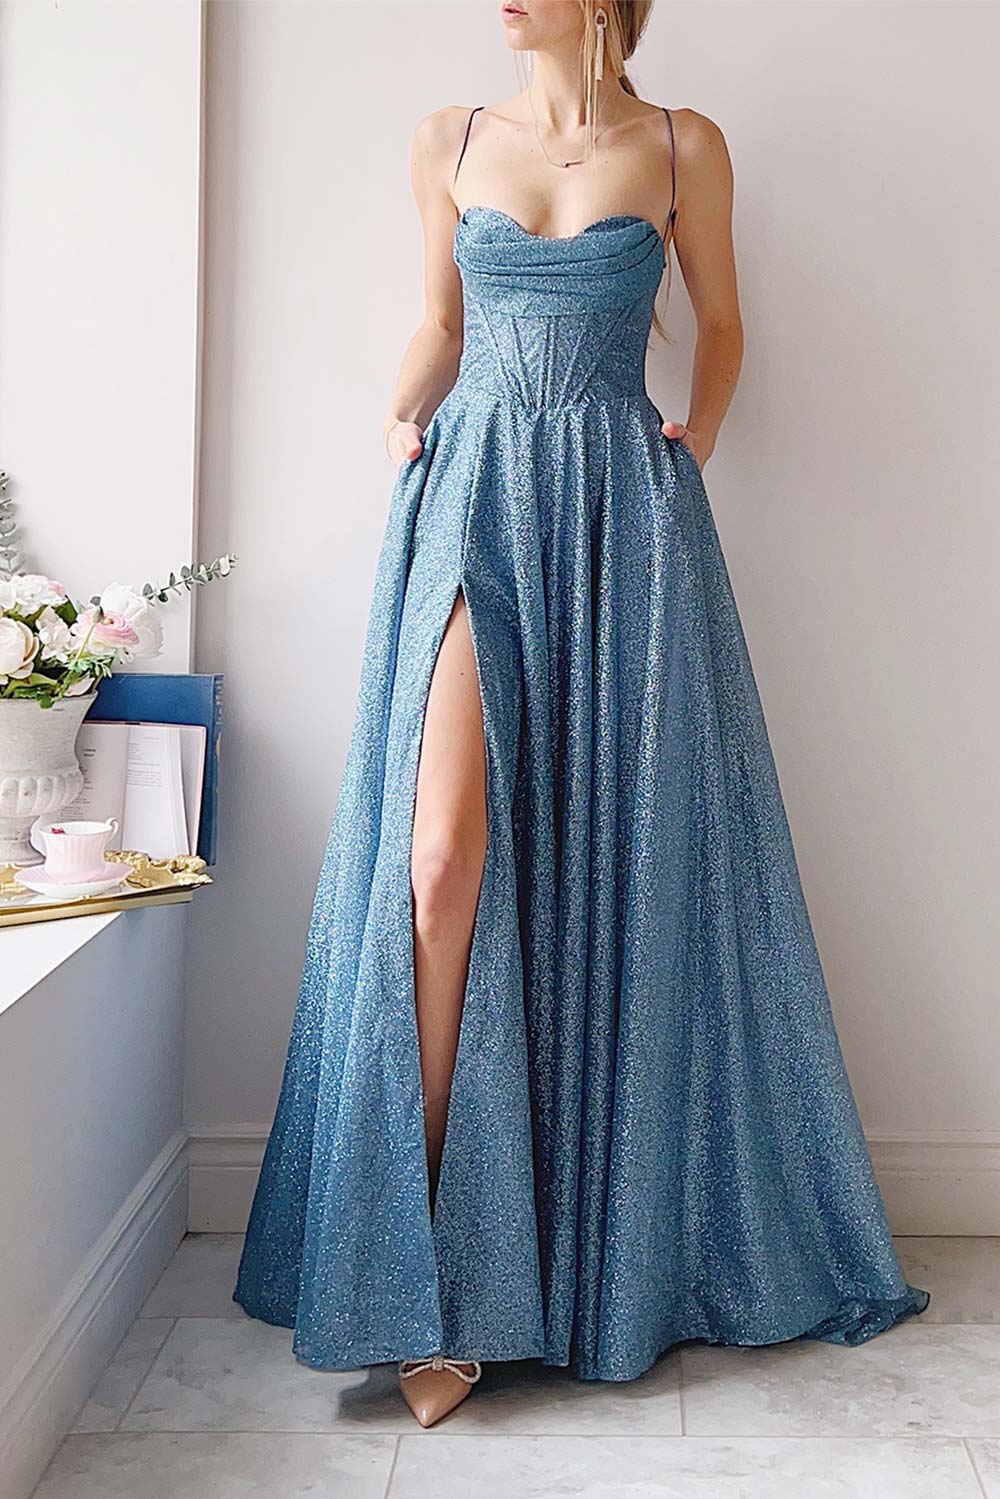 Lexy Blue Grey Sparkly Cowl Neck Maxi Dress | Boutique 1861 on model